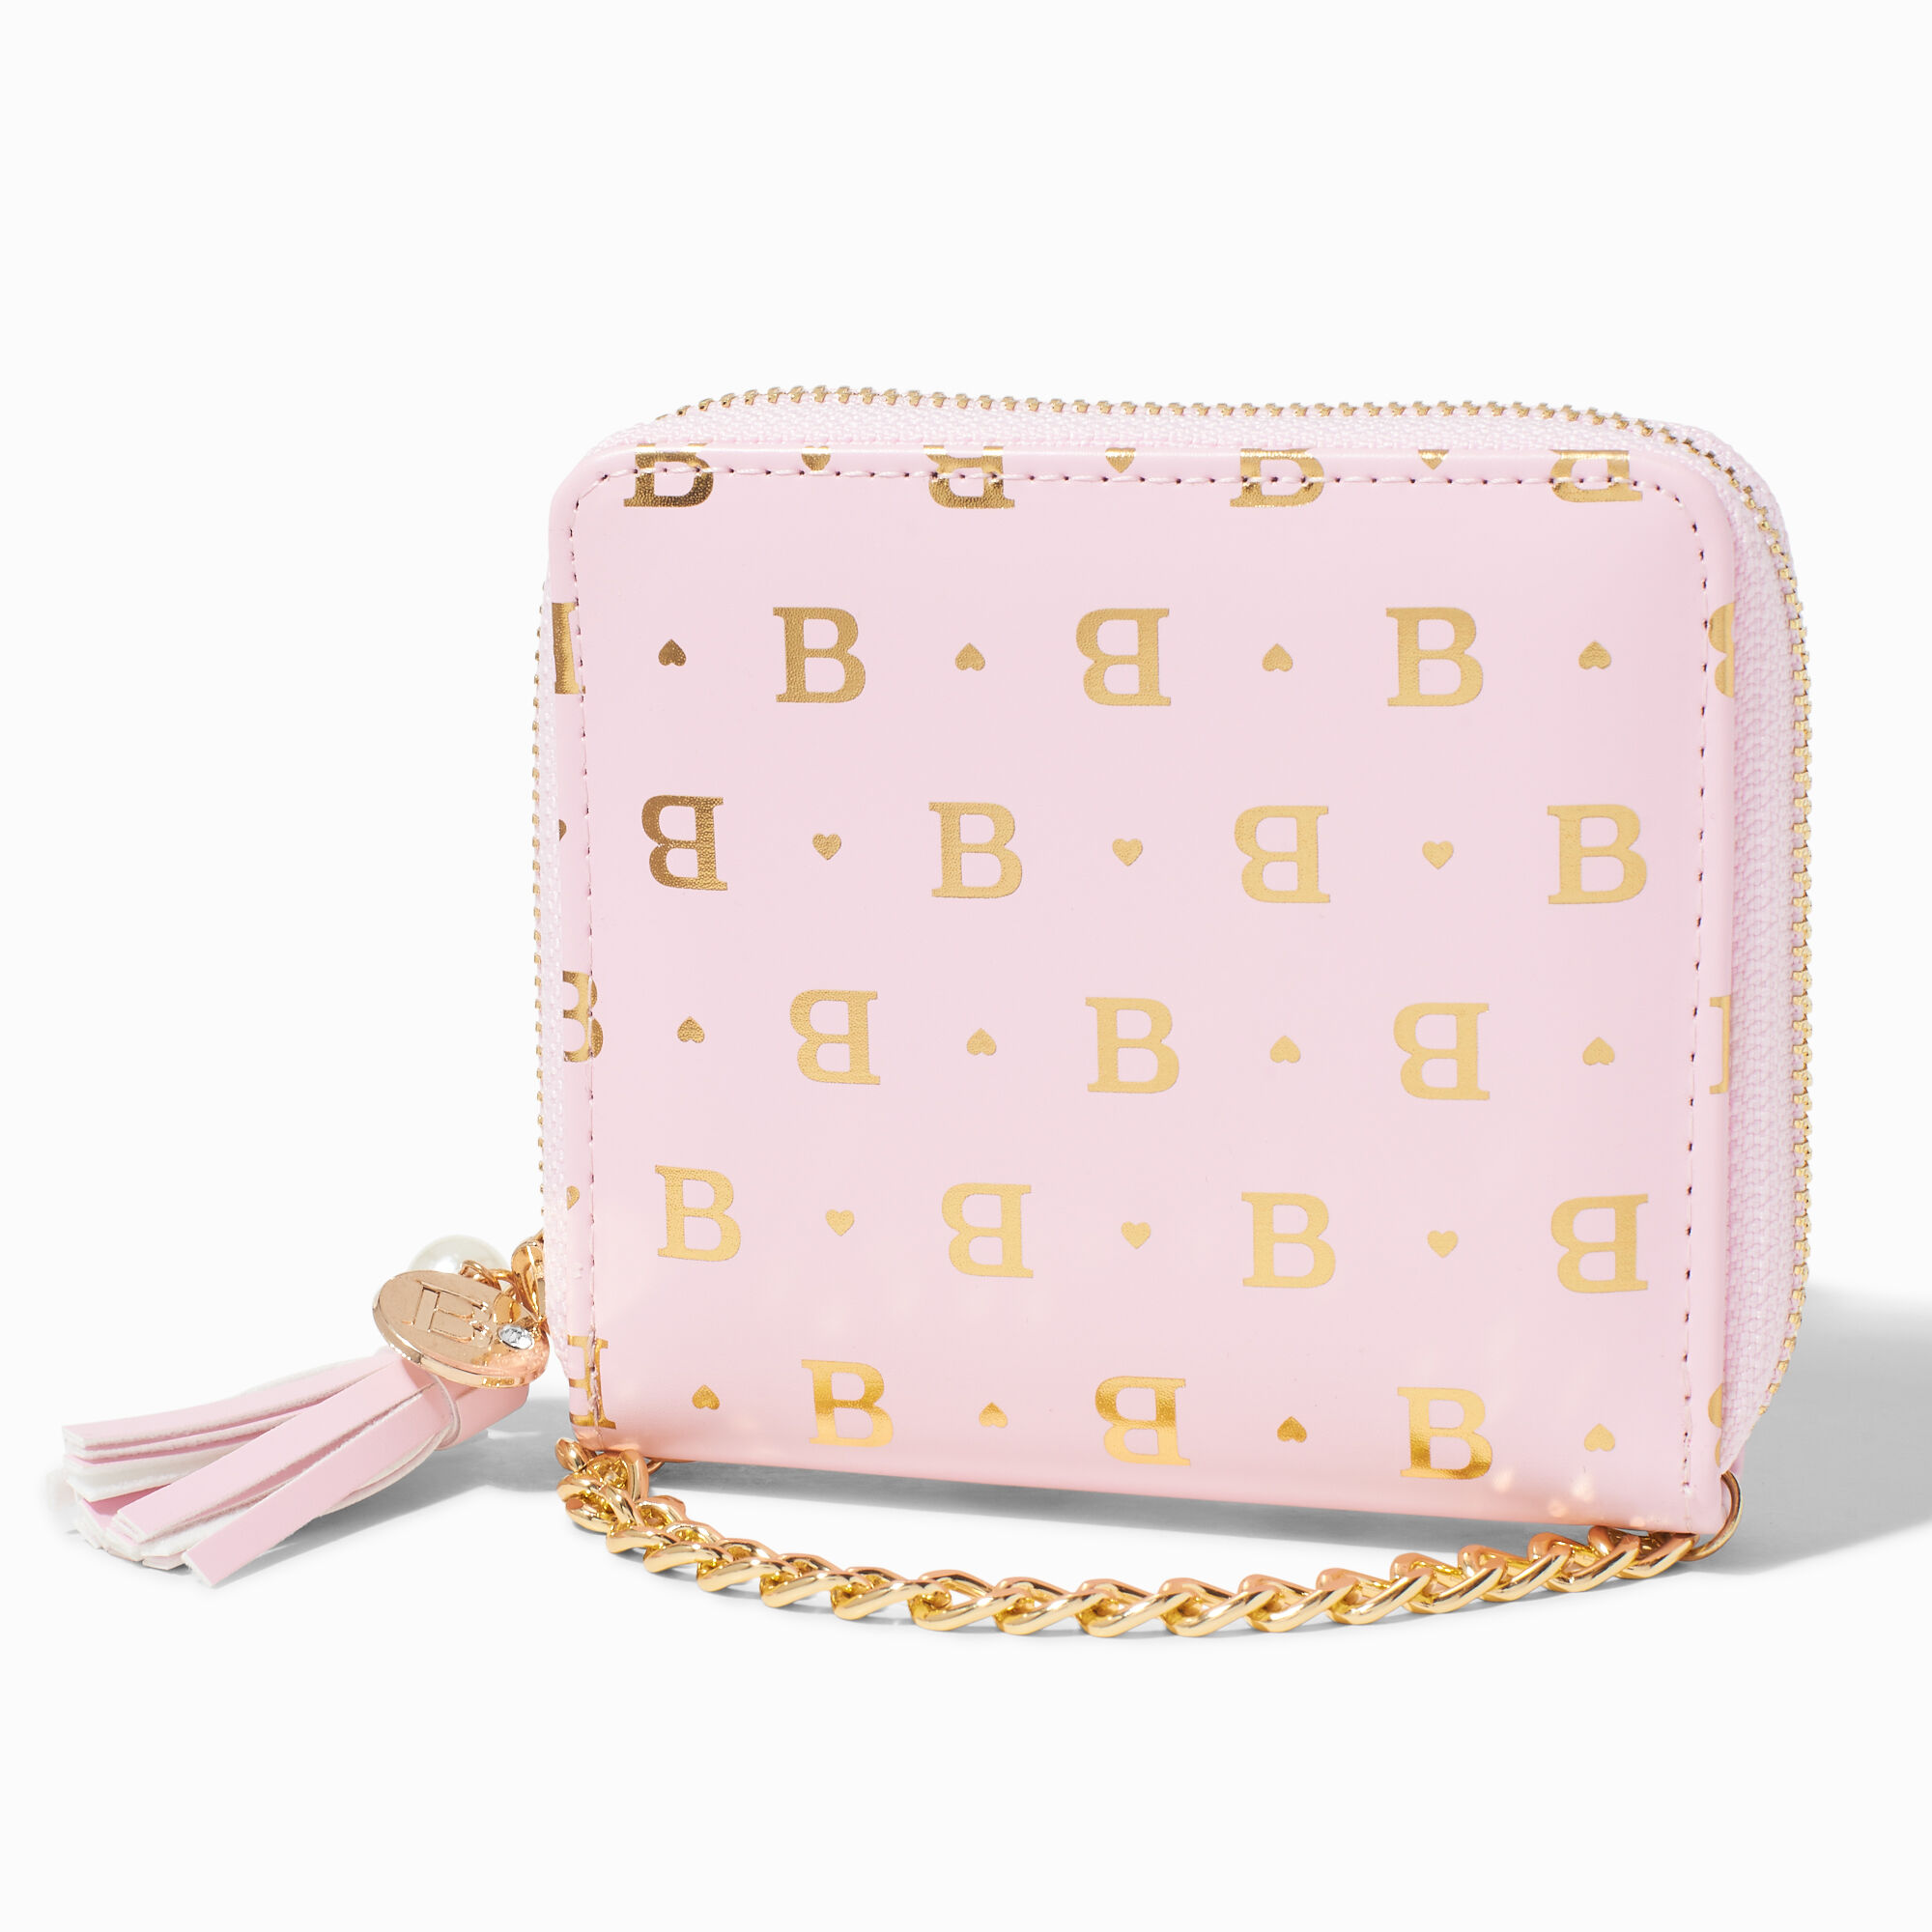 View Claires en Initial ChainStrap Wallet B Gold information